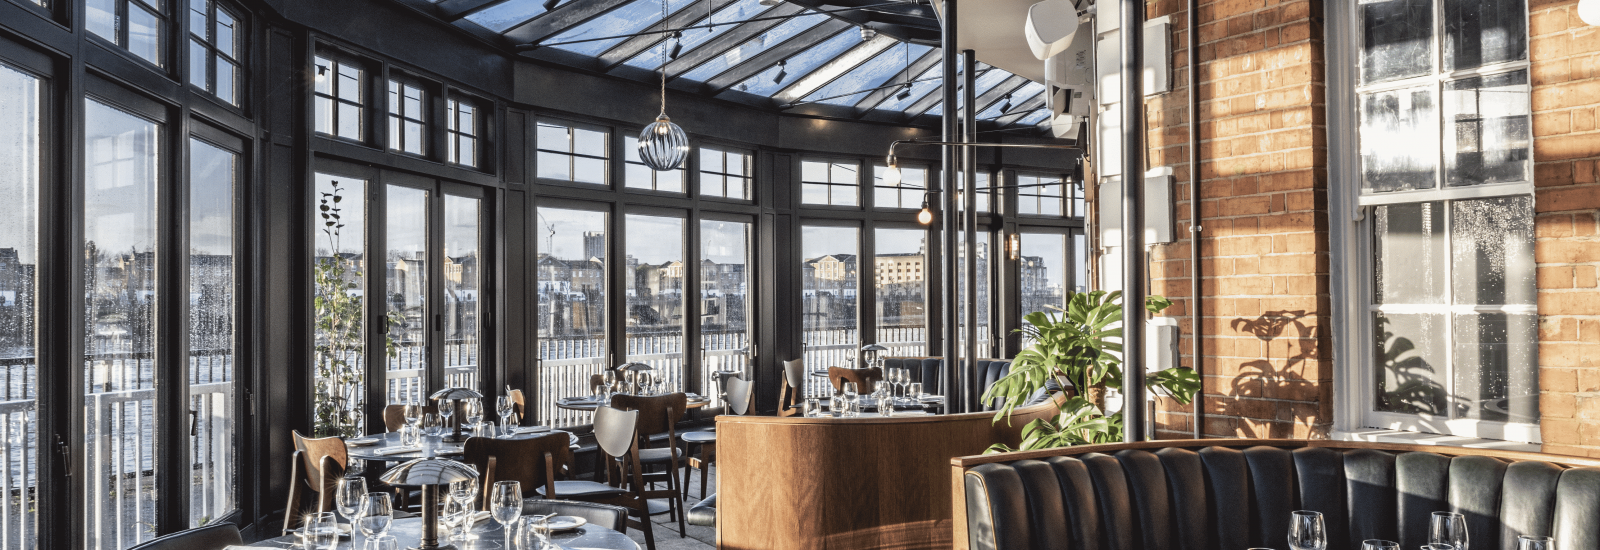 bread street kitchen and bar - limehouse